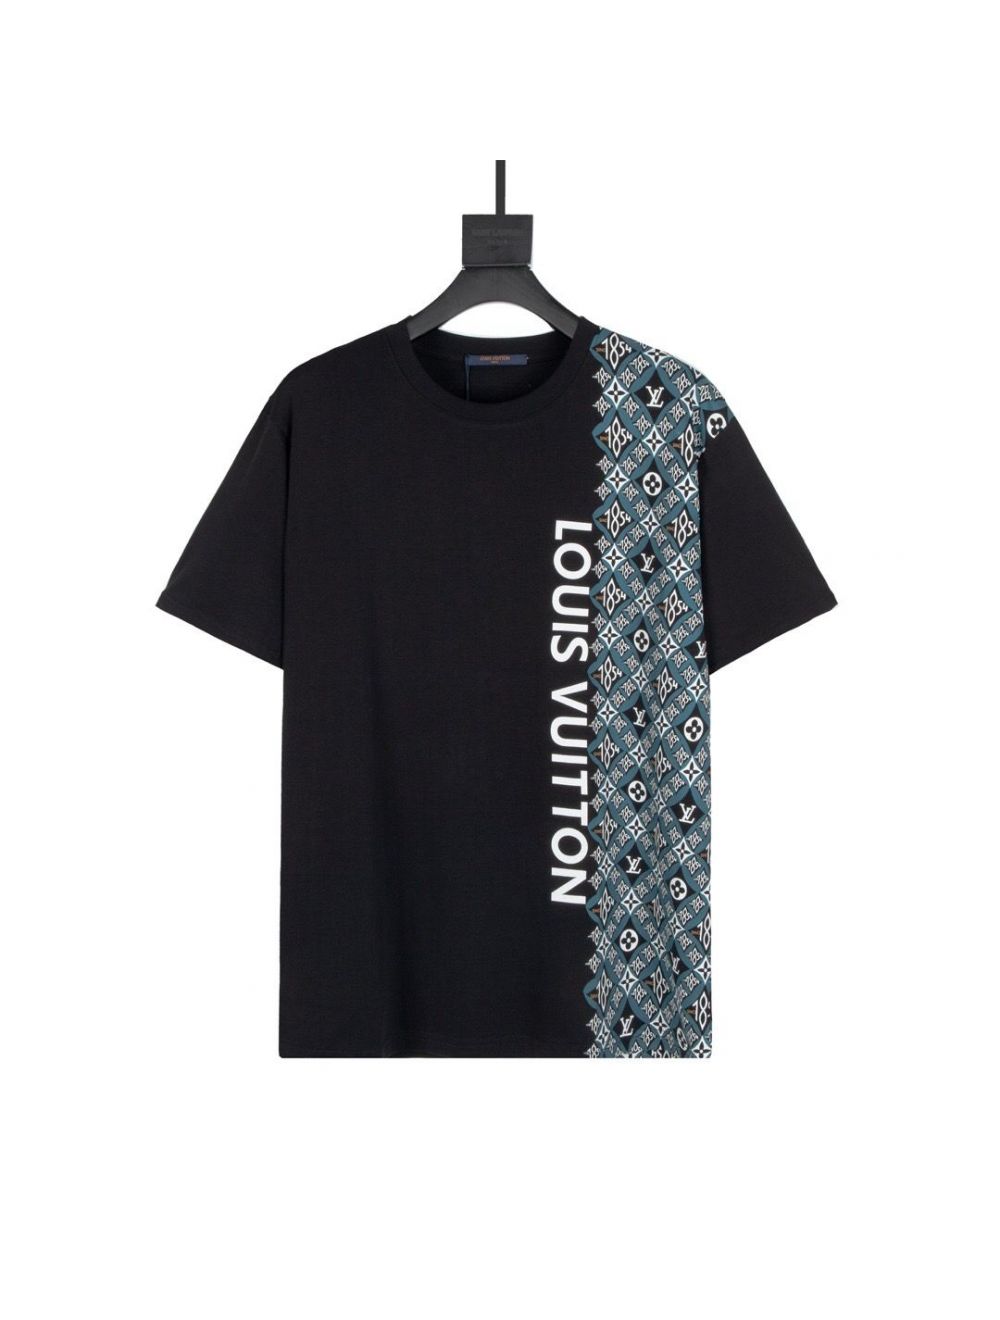 Louis Vuitton T-Shirts in Nigeria for sale ▷ Prices on